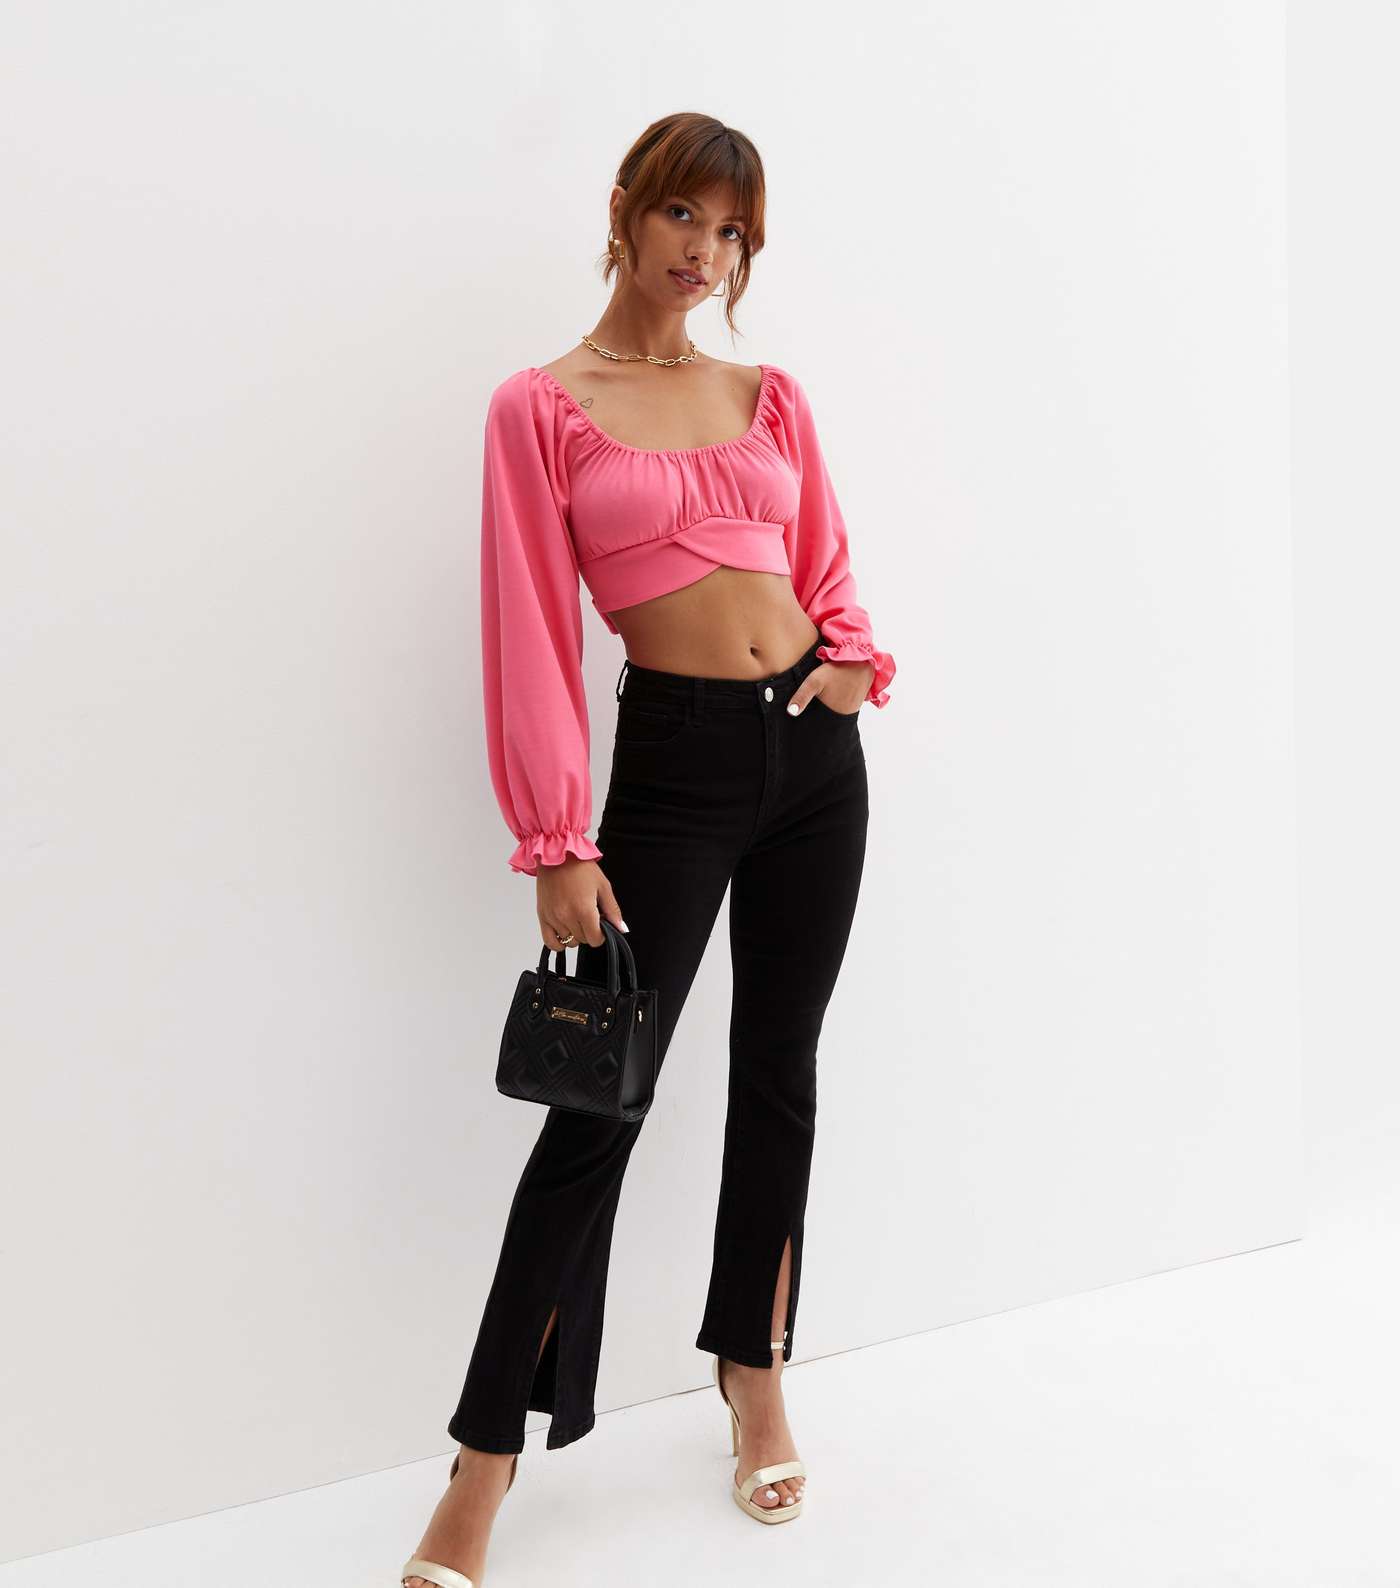 Cameo Rose Bright Pink Long Puff Sleeve Tie Back Crop Top Image 3